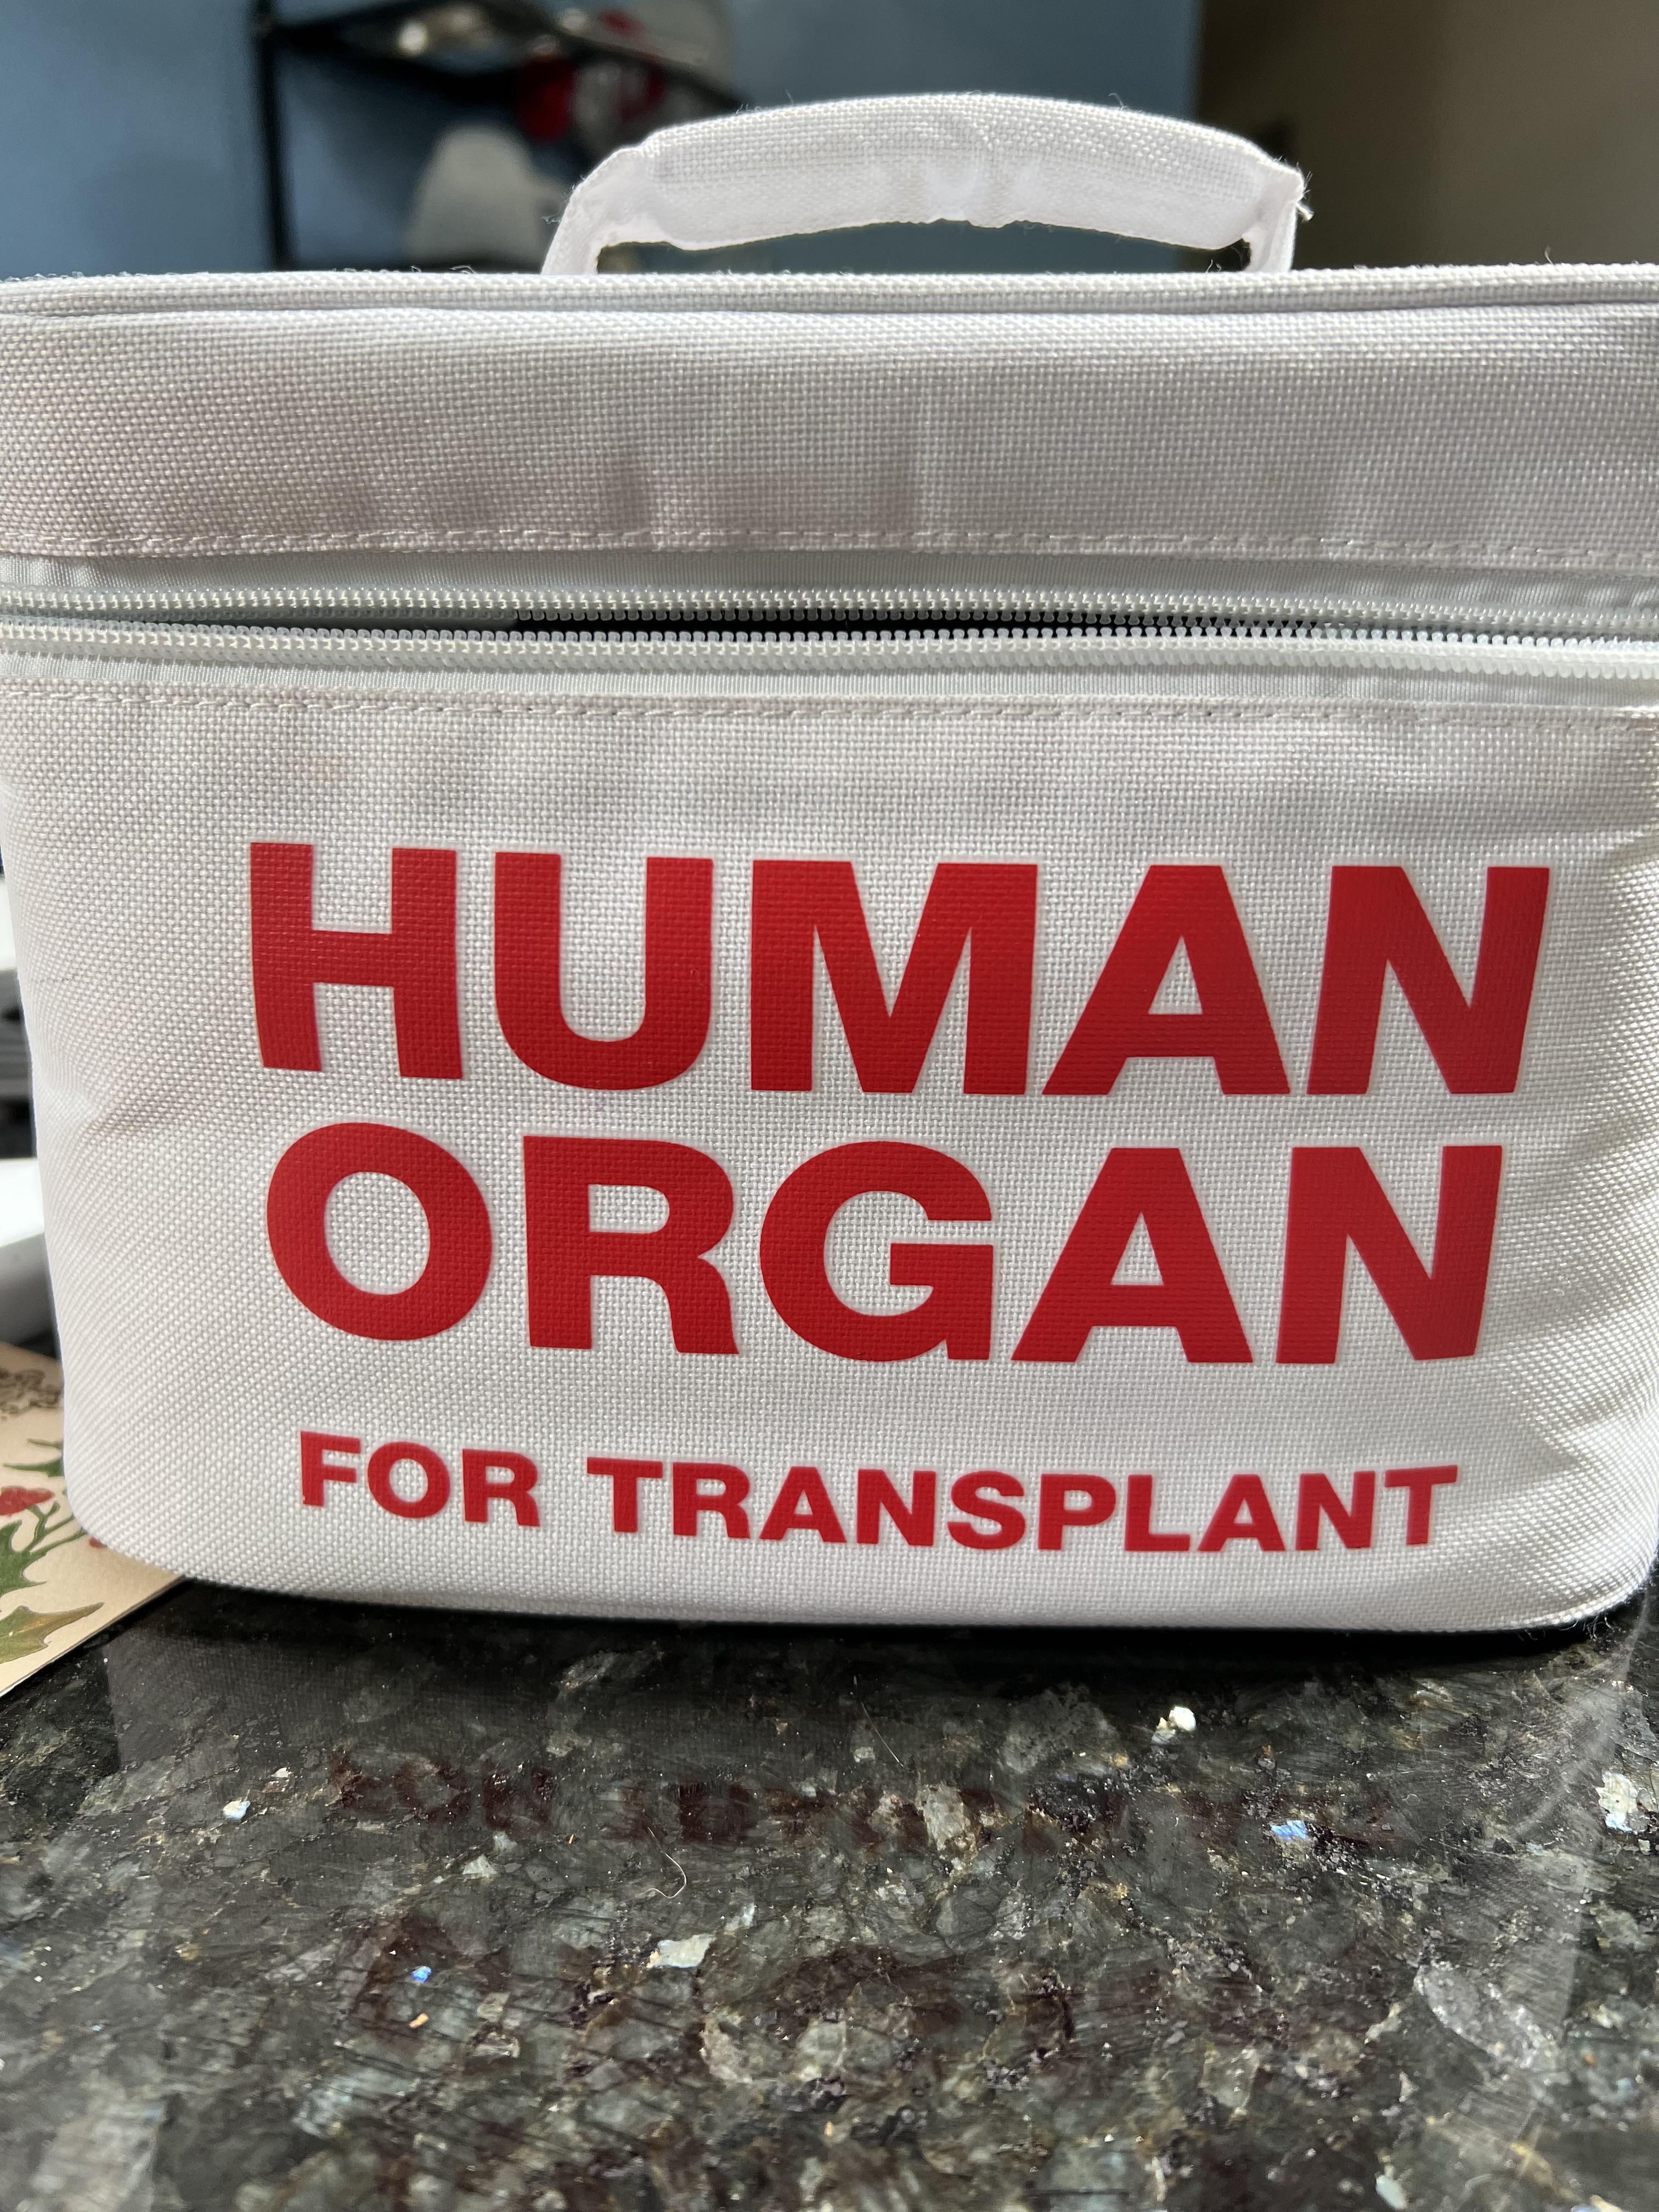 My wife is a nurse and this is her lunch box.